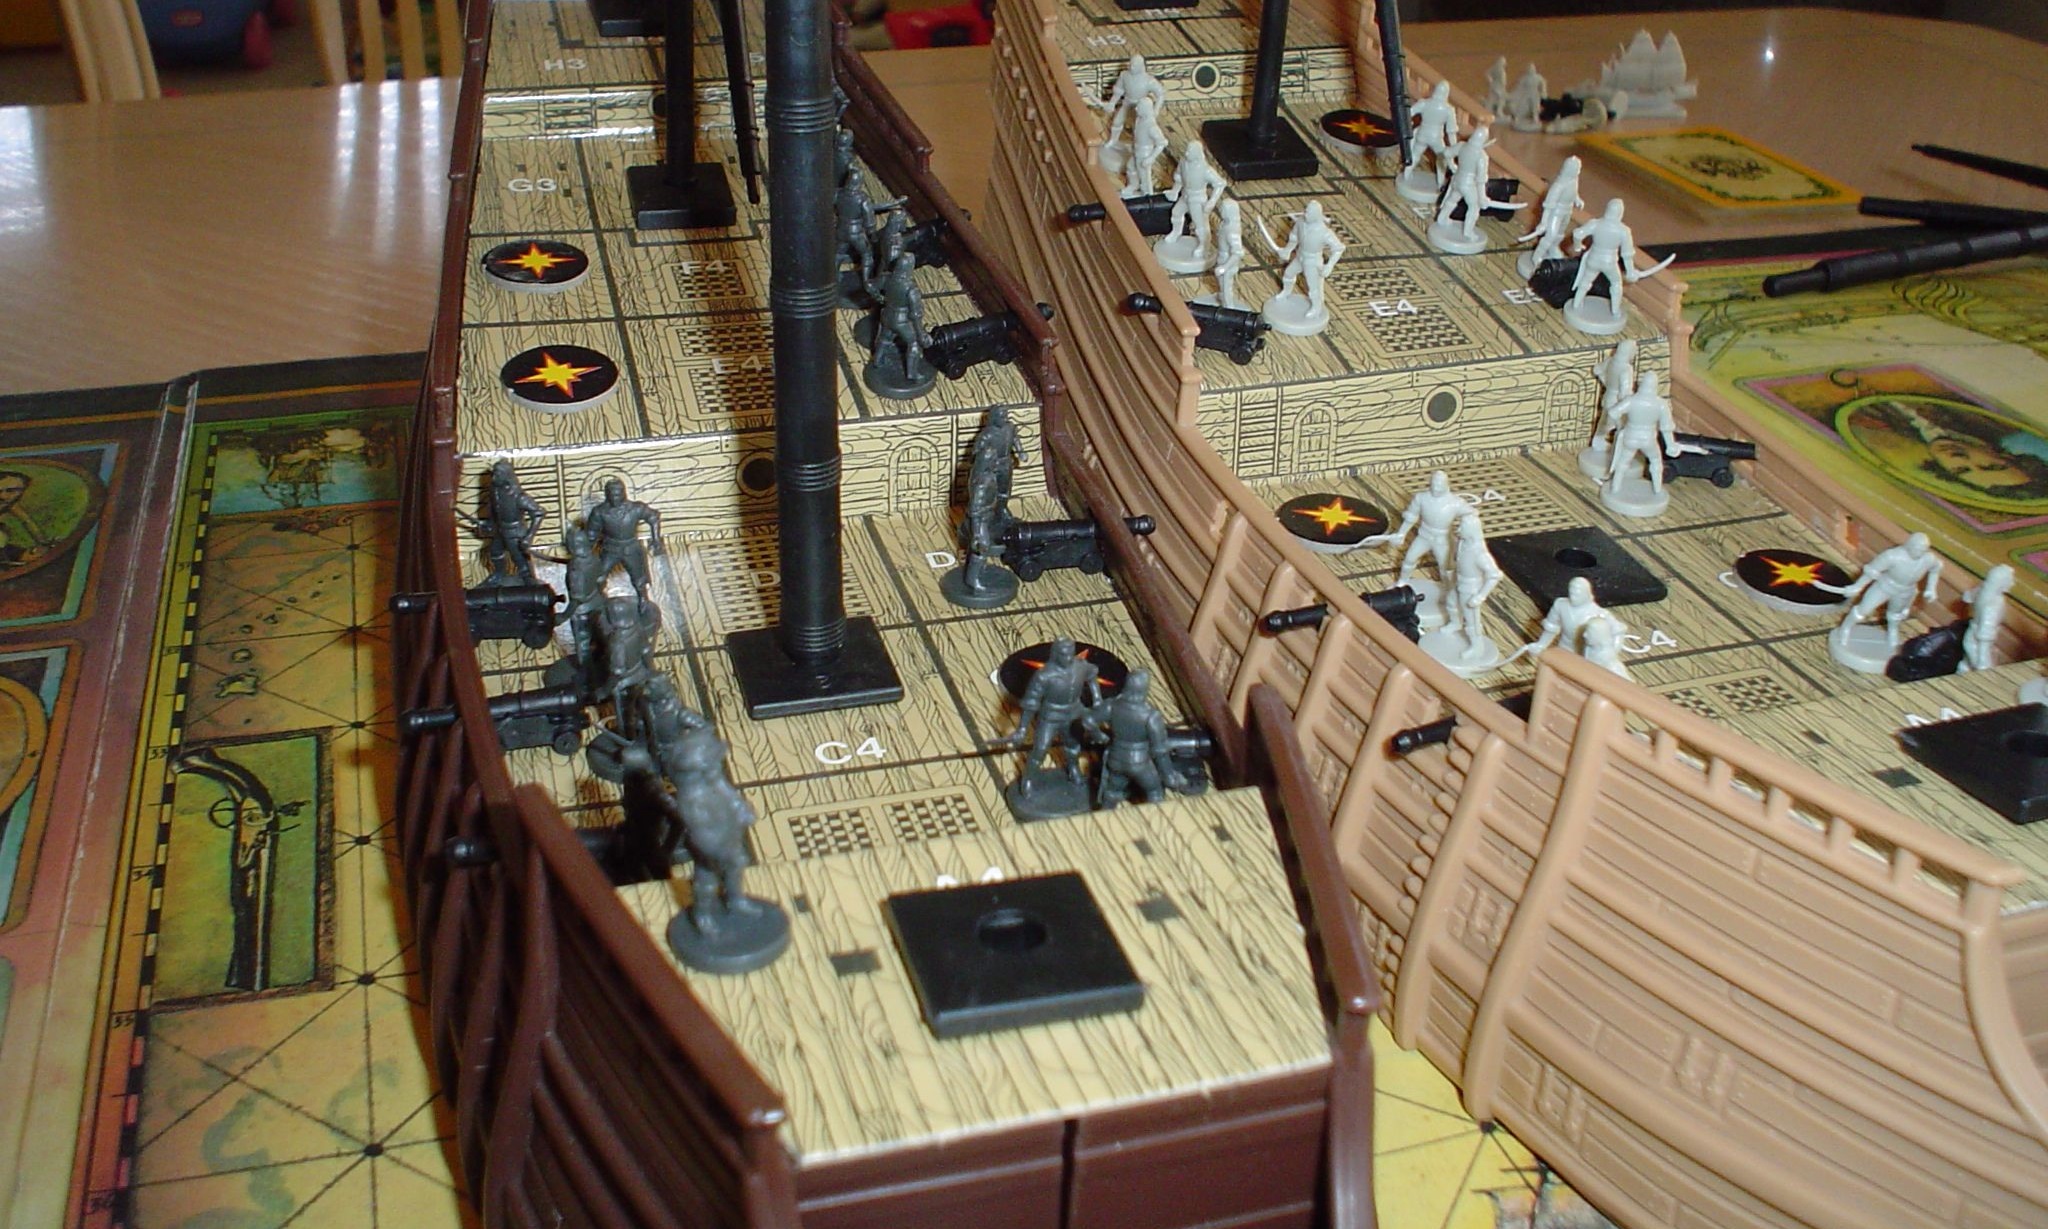 Broadsides and Boarding Parties